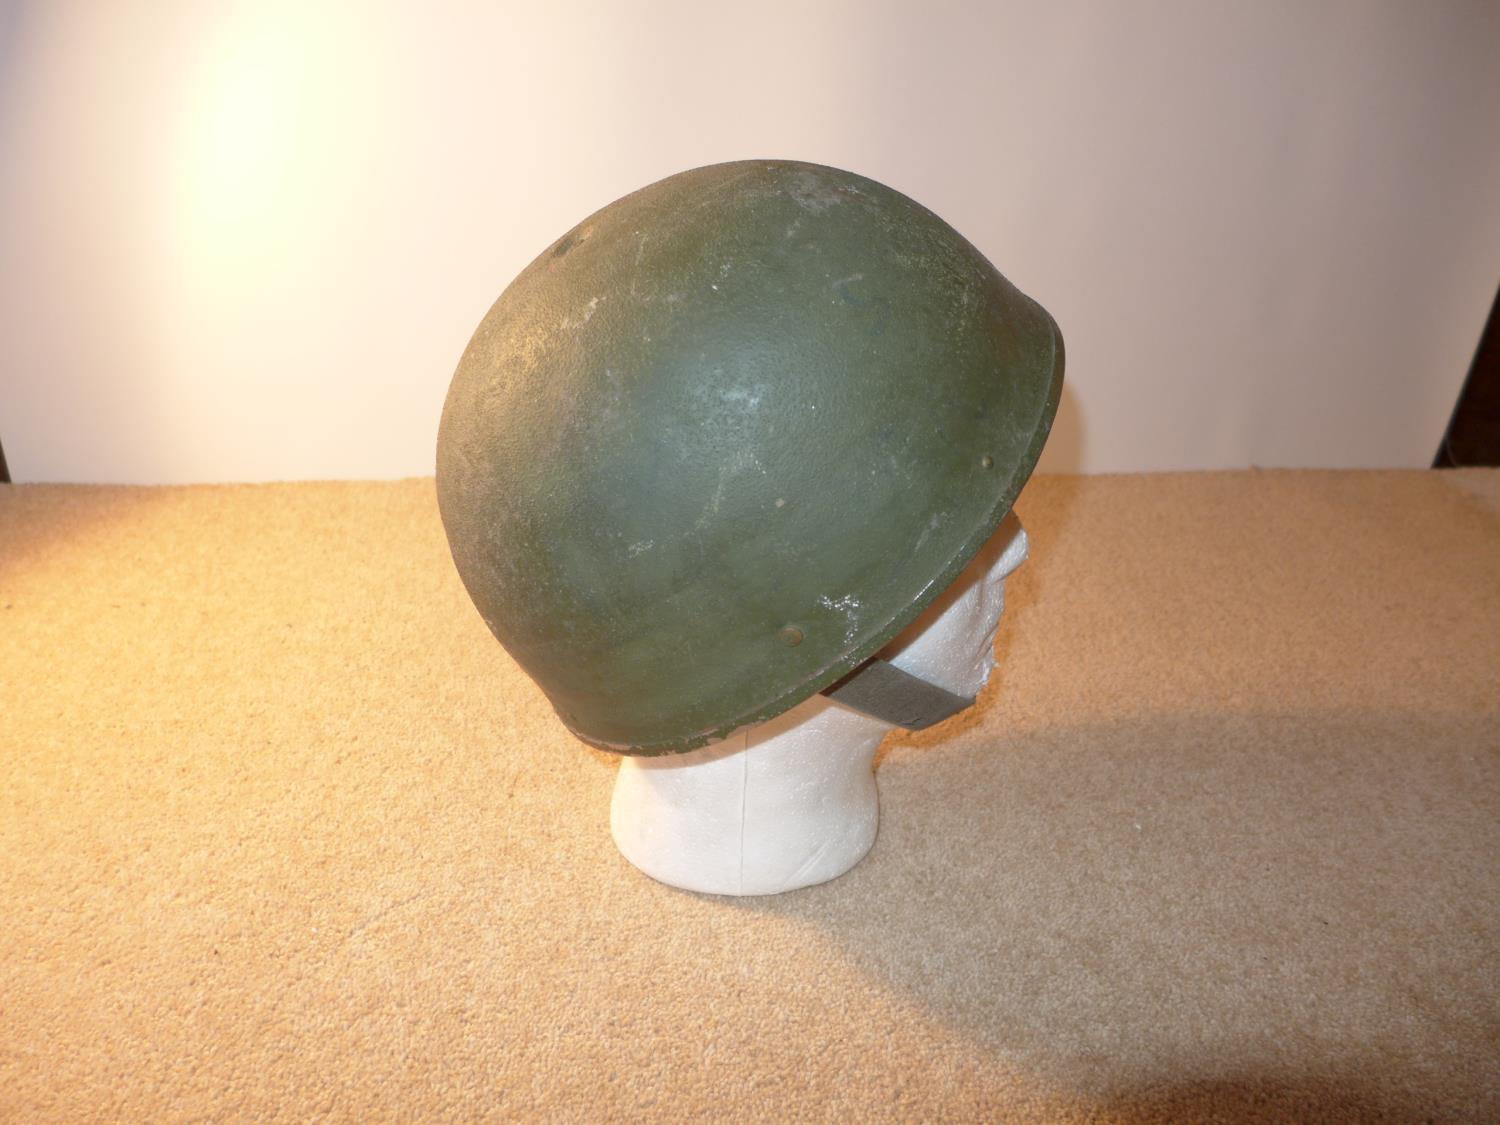 A BRITISH ARMY TANK CREW HELMET AND LINER - Image 2 of 3